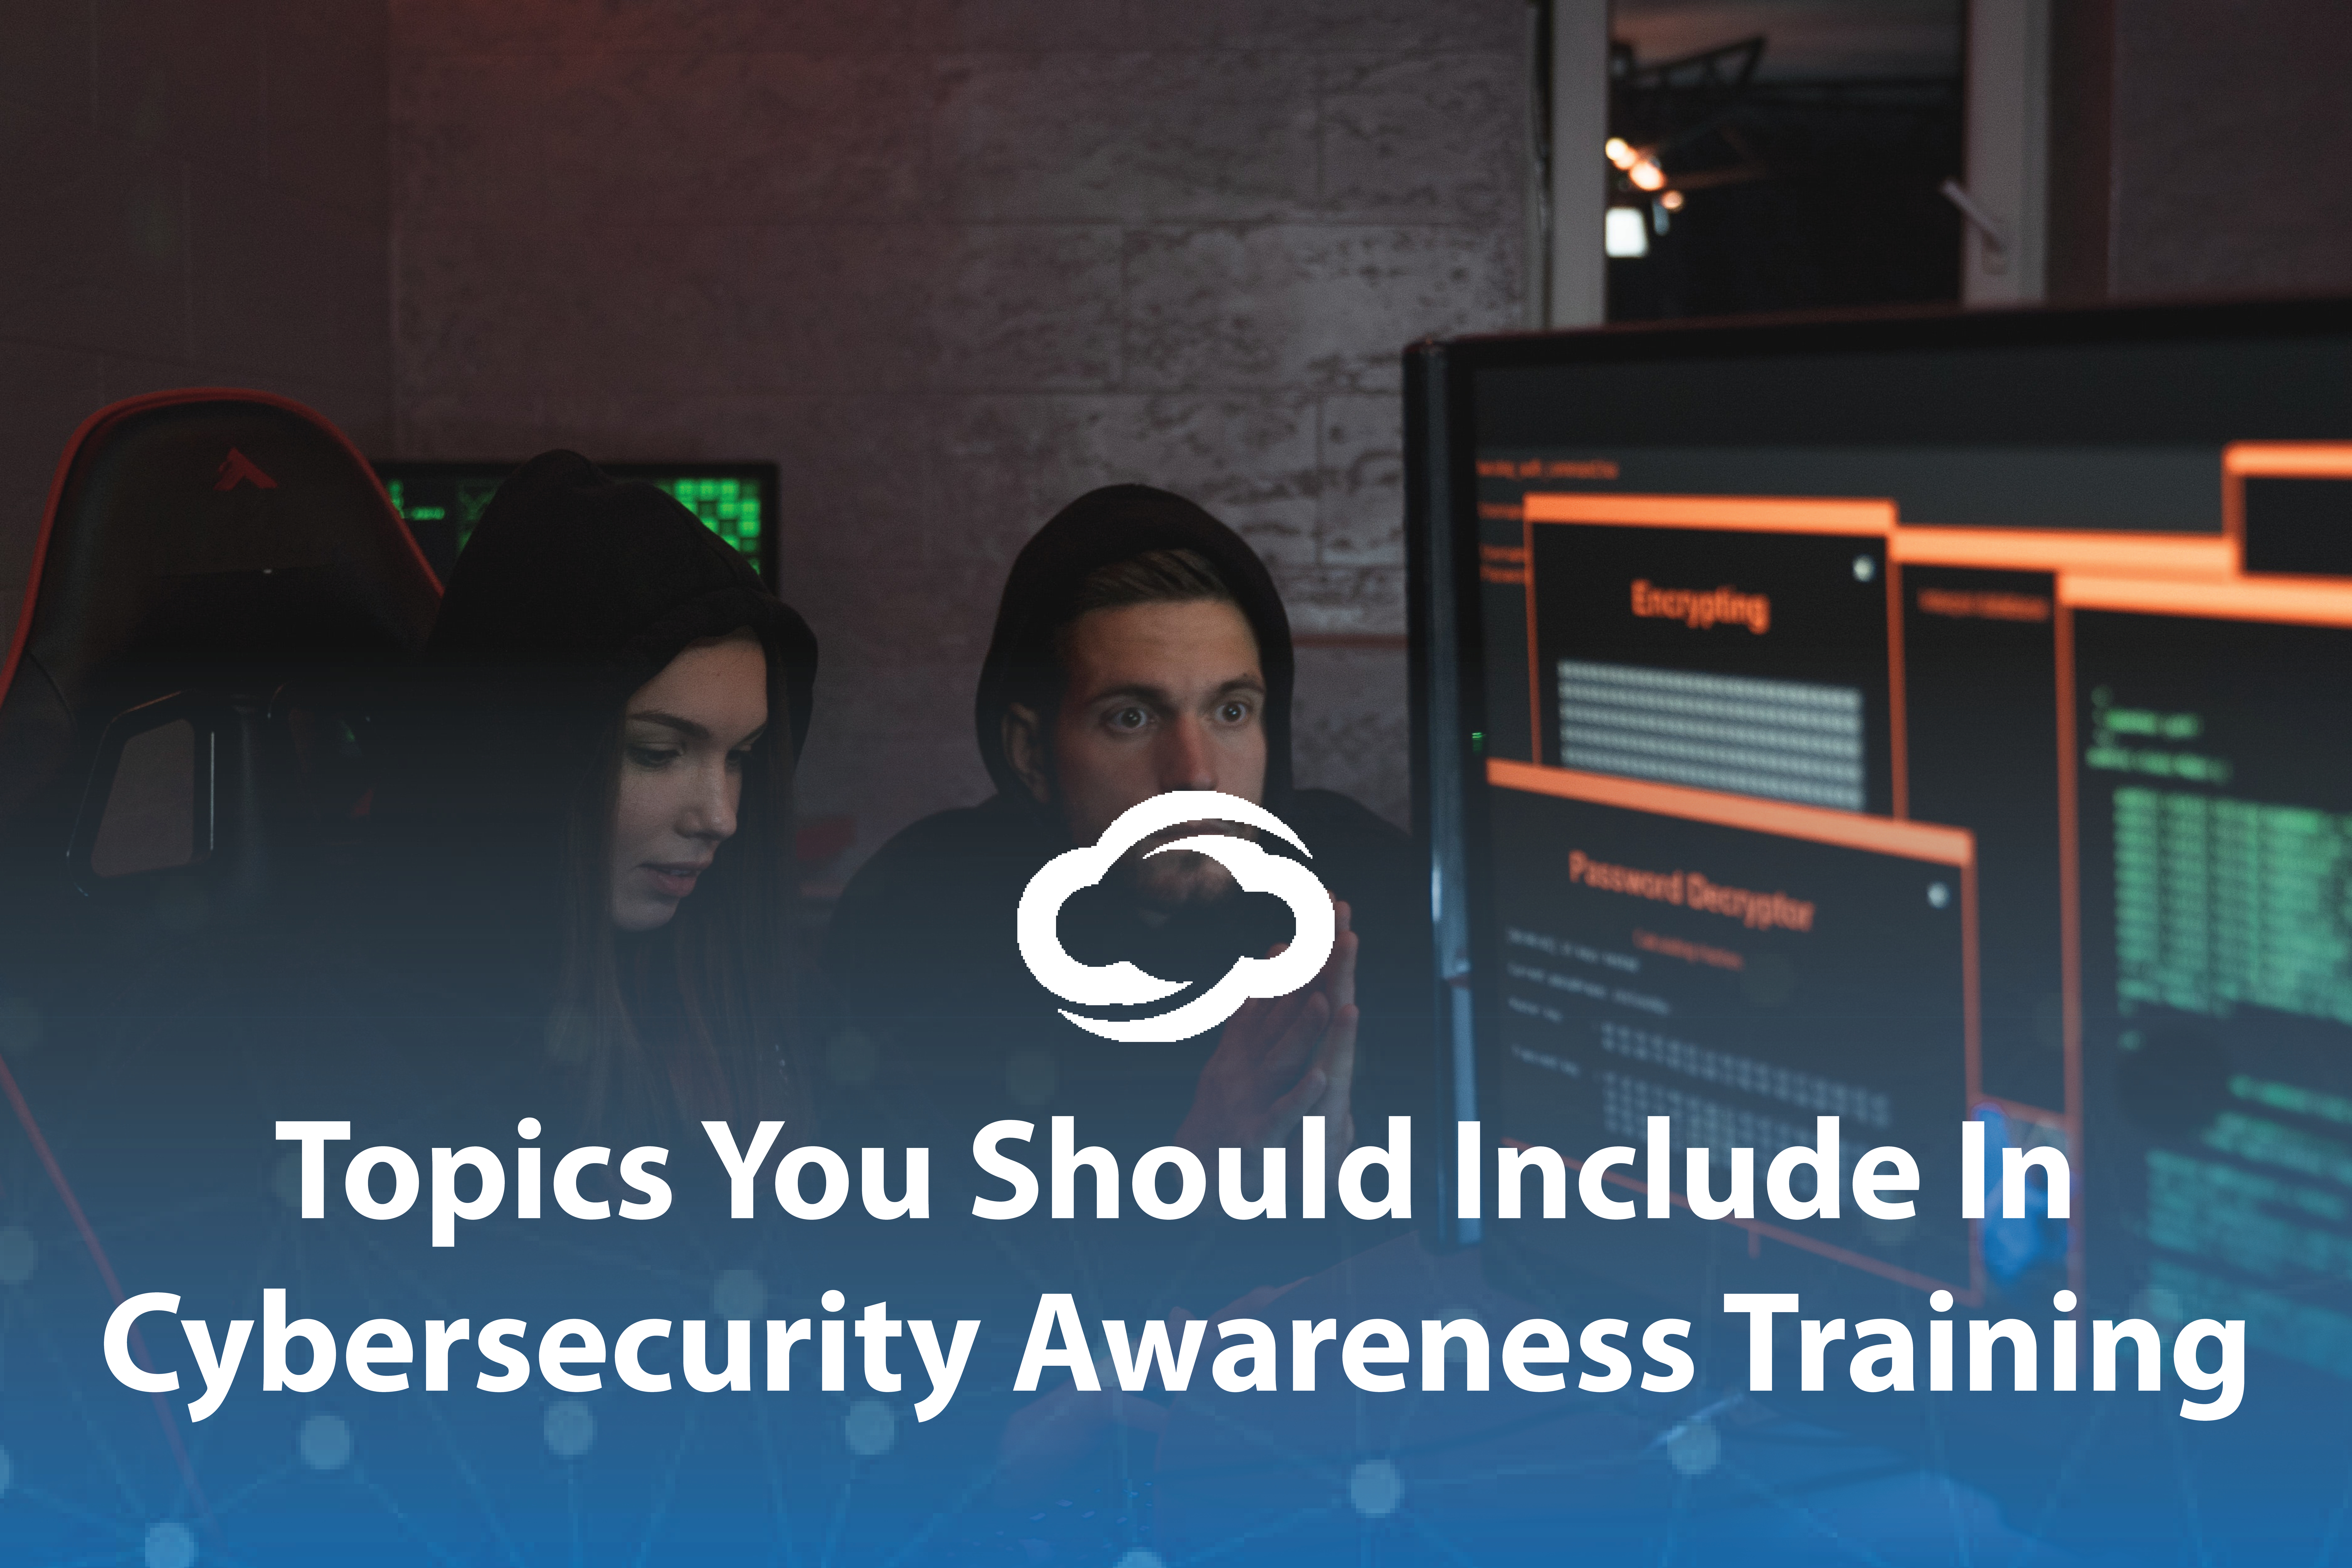 Topics You Should Include In Cybersecurity Awareness Training